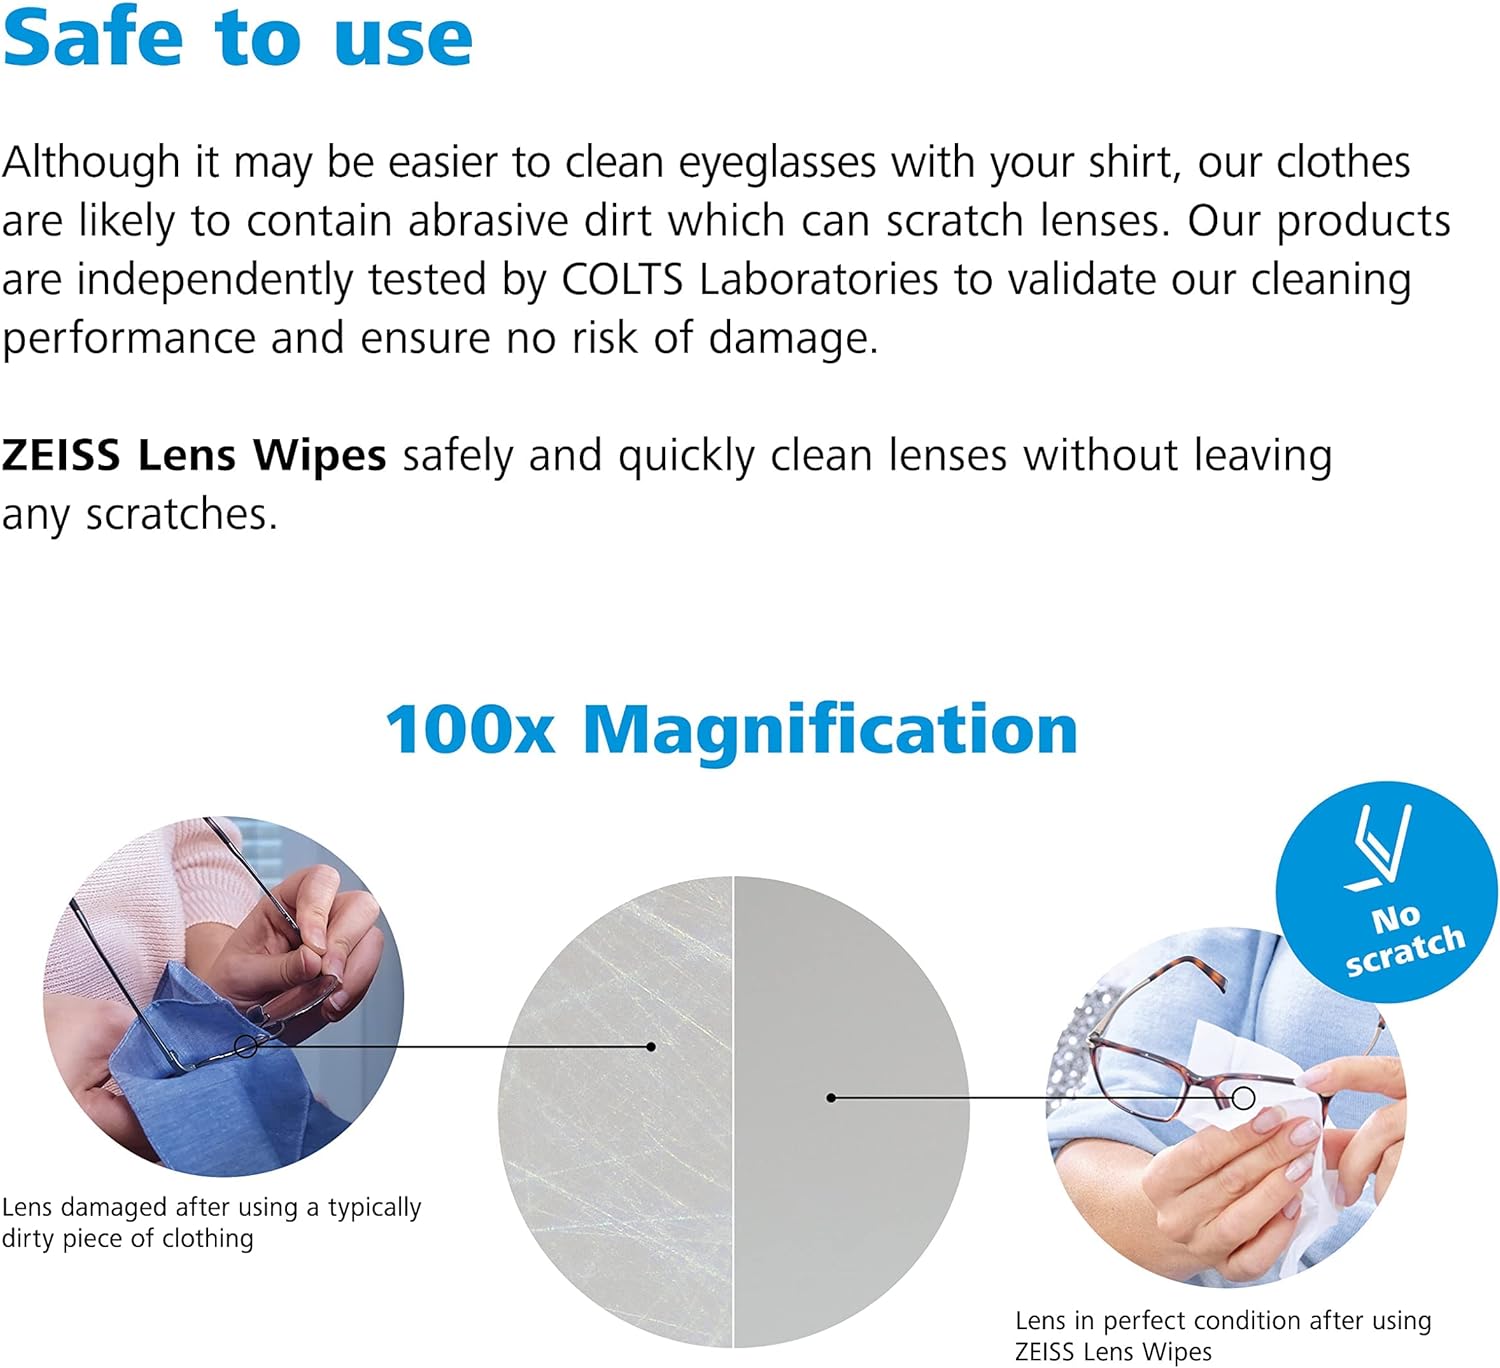 ZEISS Lens Cleaning Wipes 200 Count 12-Pack White